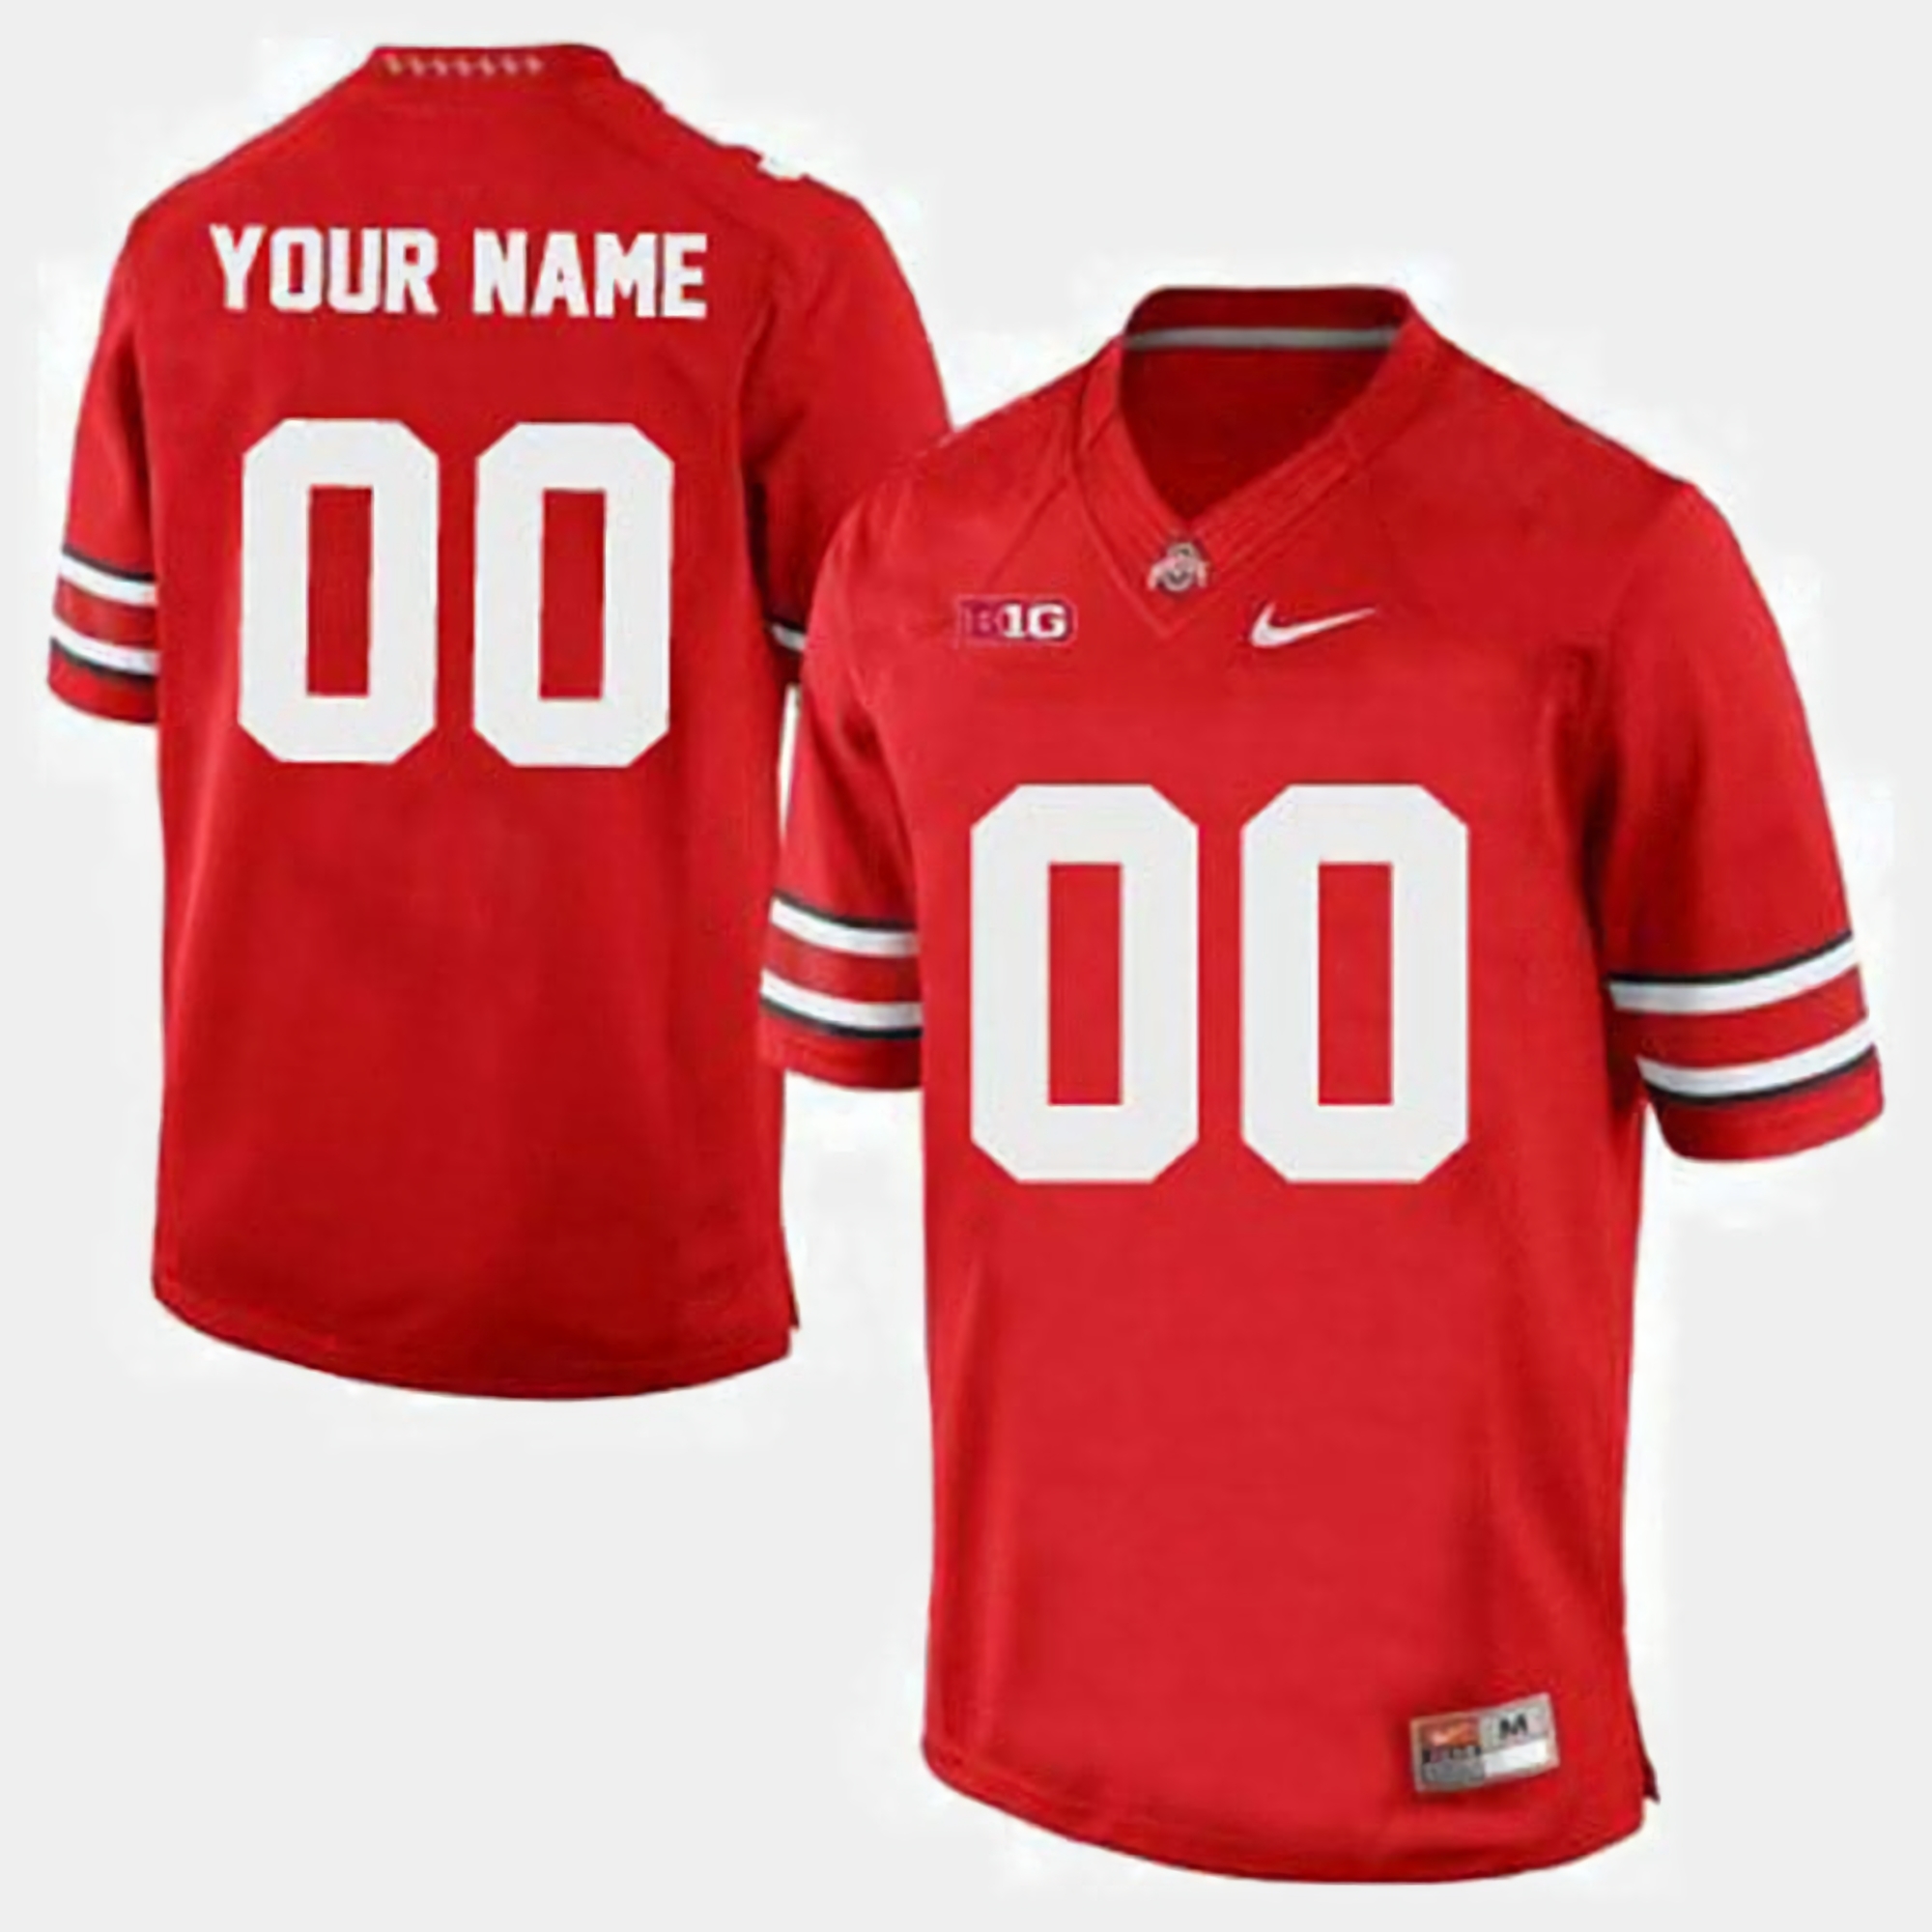 Custom Ohio State Buckeyes Men's NCAA #00 Nike Red College Stitched Football Jersey SLI7556CL